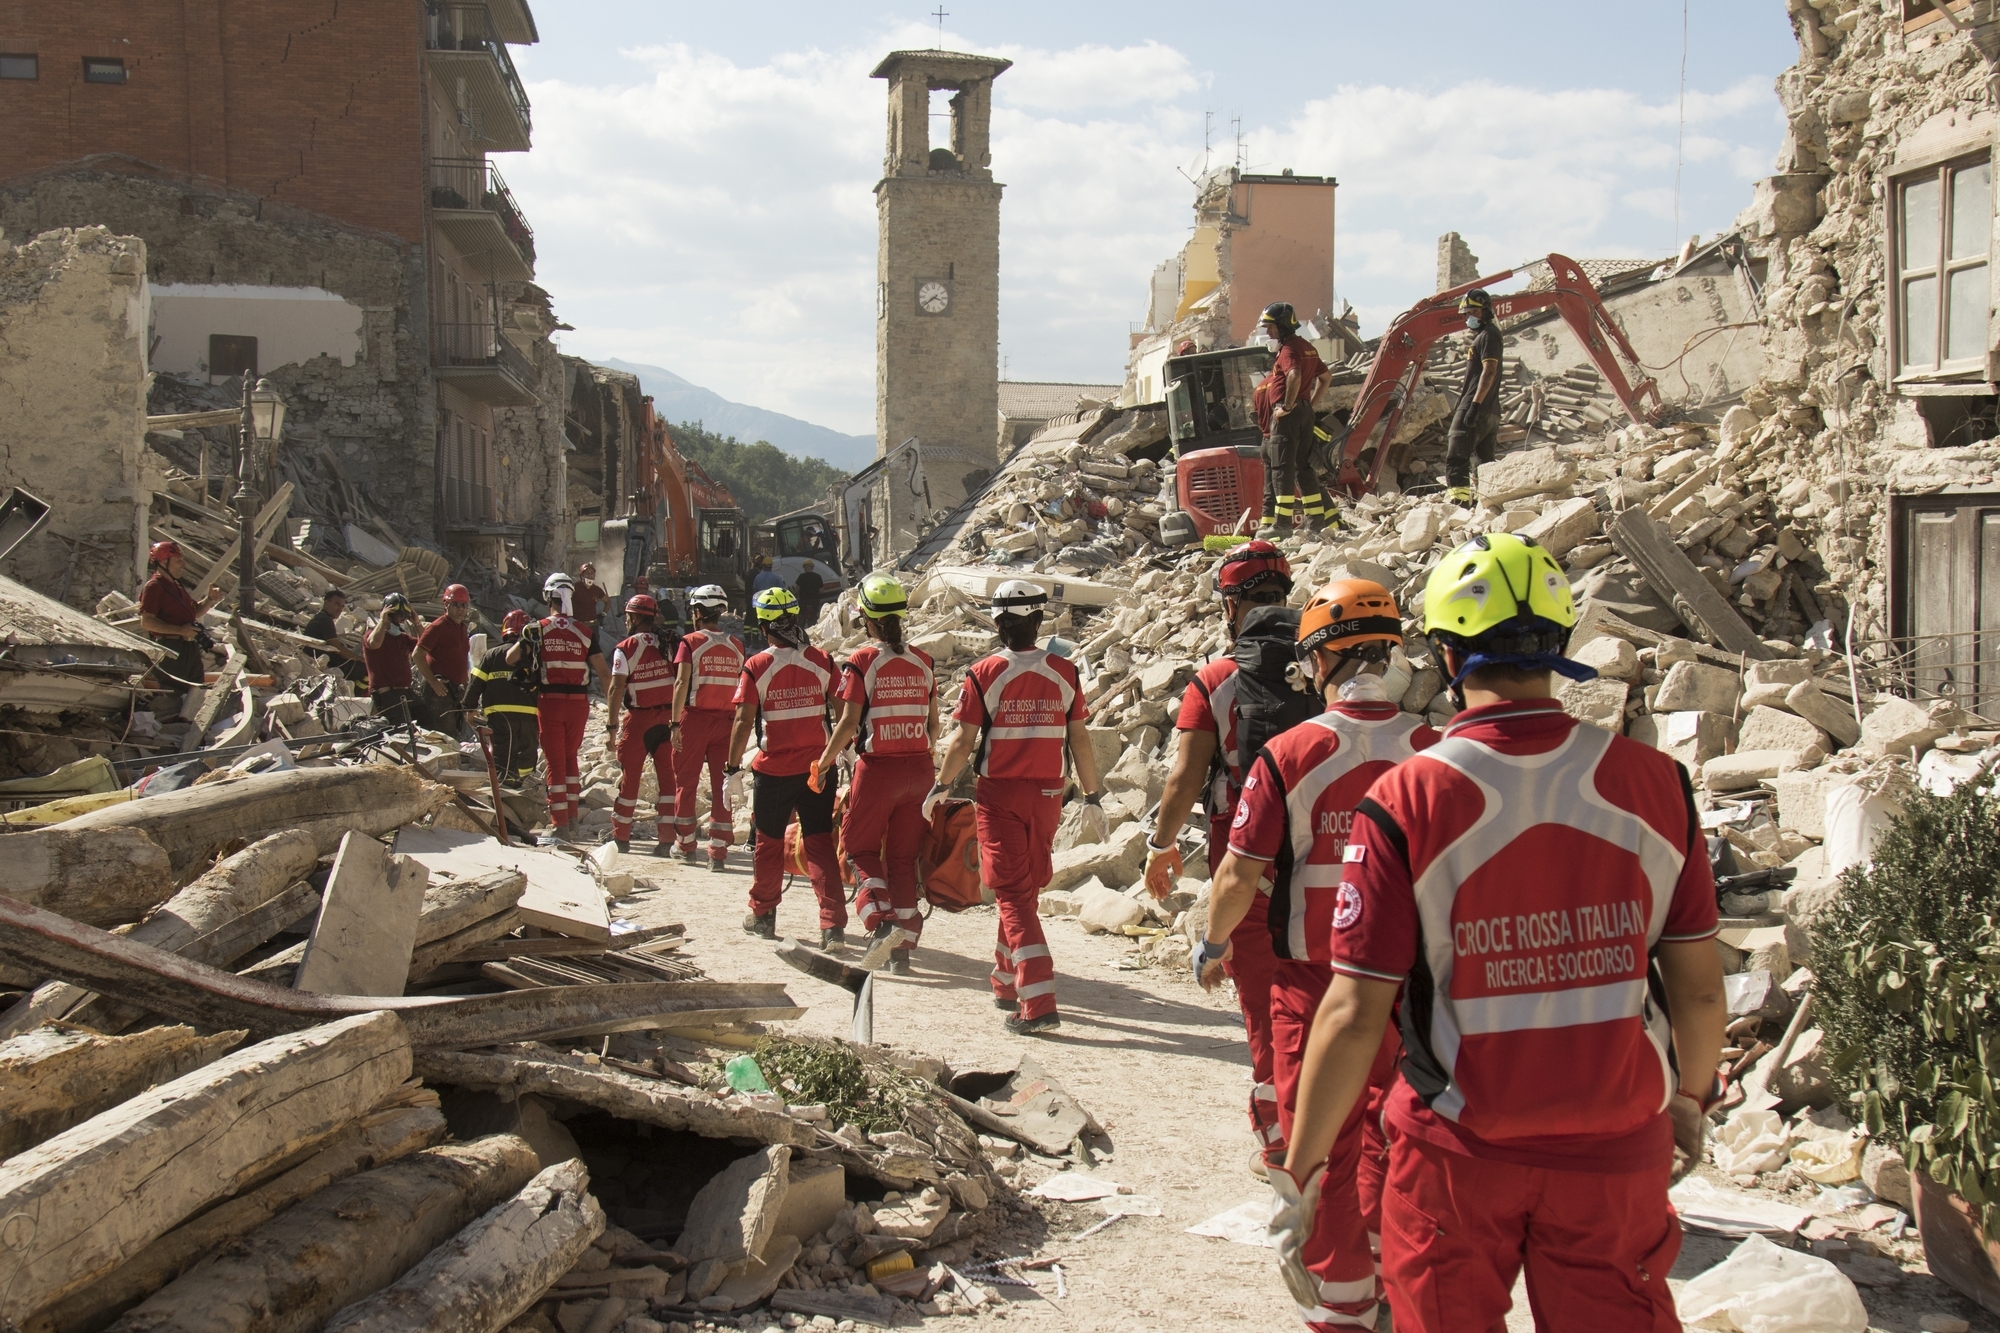 Earthquake in Italy aftermath assessment for EMERCOM (Russia) (30.08.16)